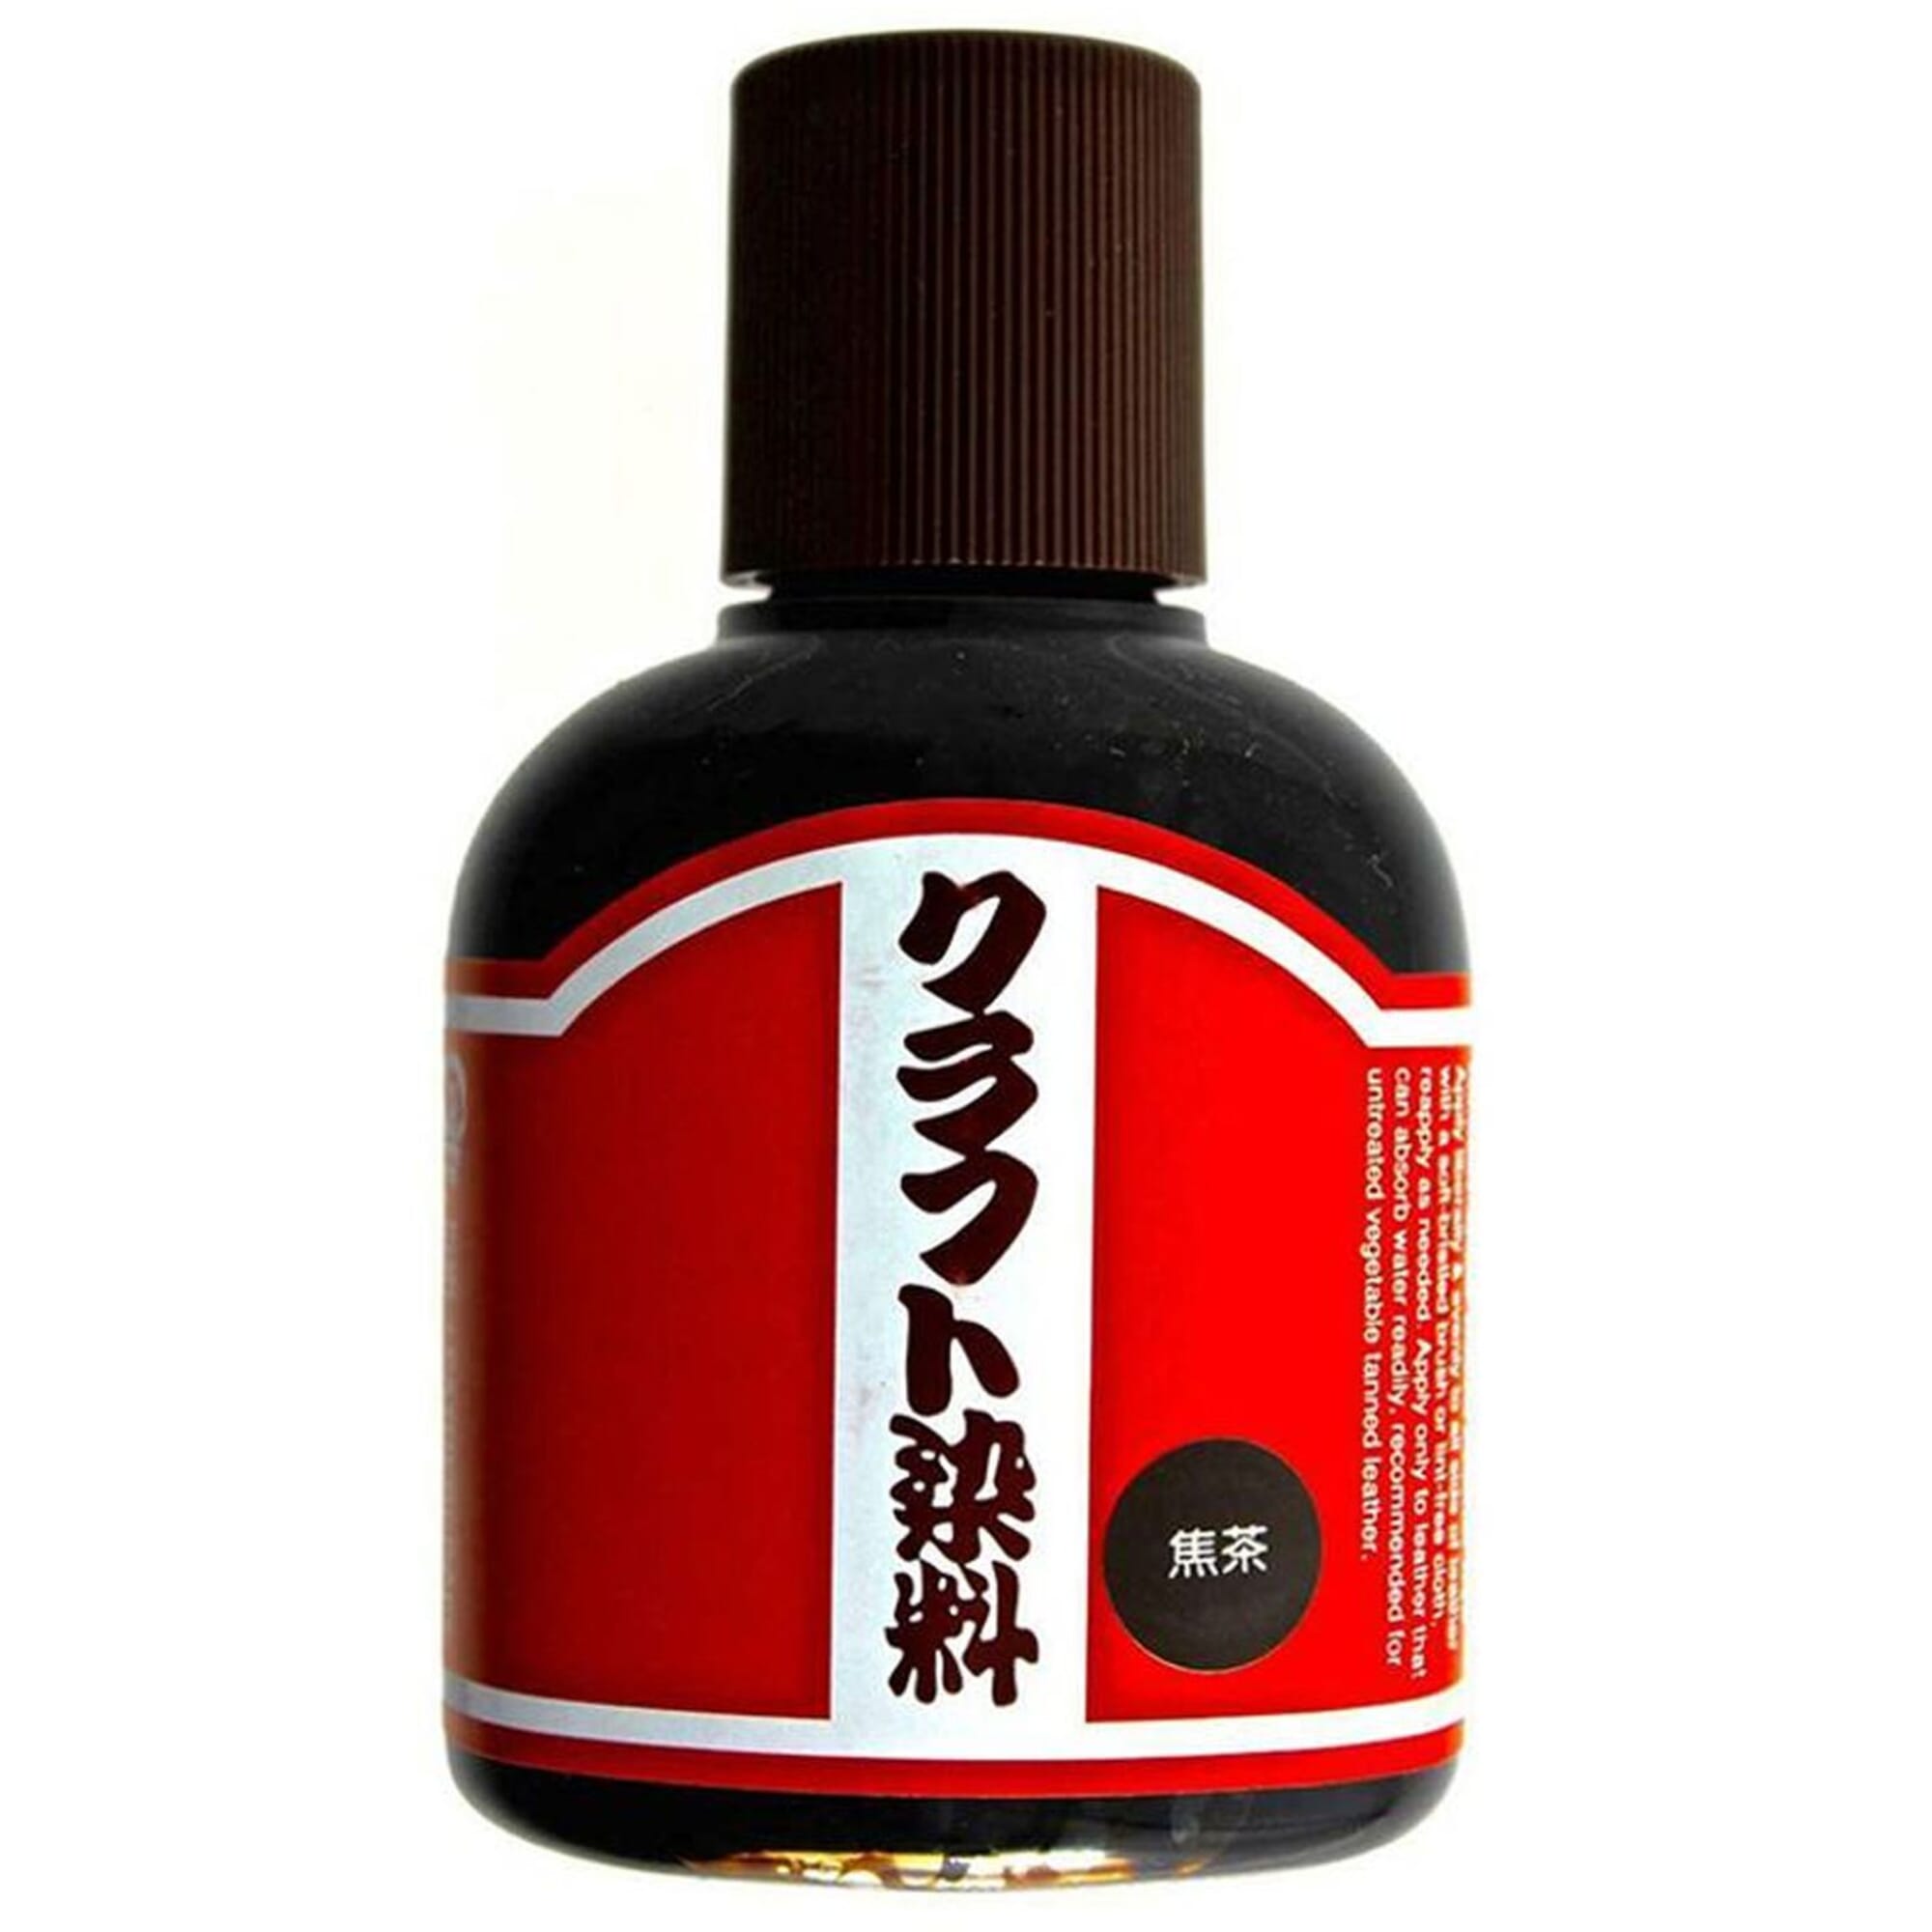 Craft Sha No.10 Dark Brown Leathercraft Paint 100ml 3.4oz Water Based Leather Dye Solution, for Dyeing Untreated Vegetable Tanned Leather